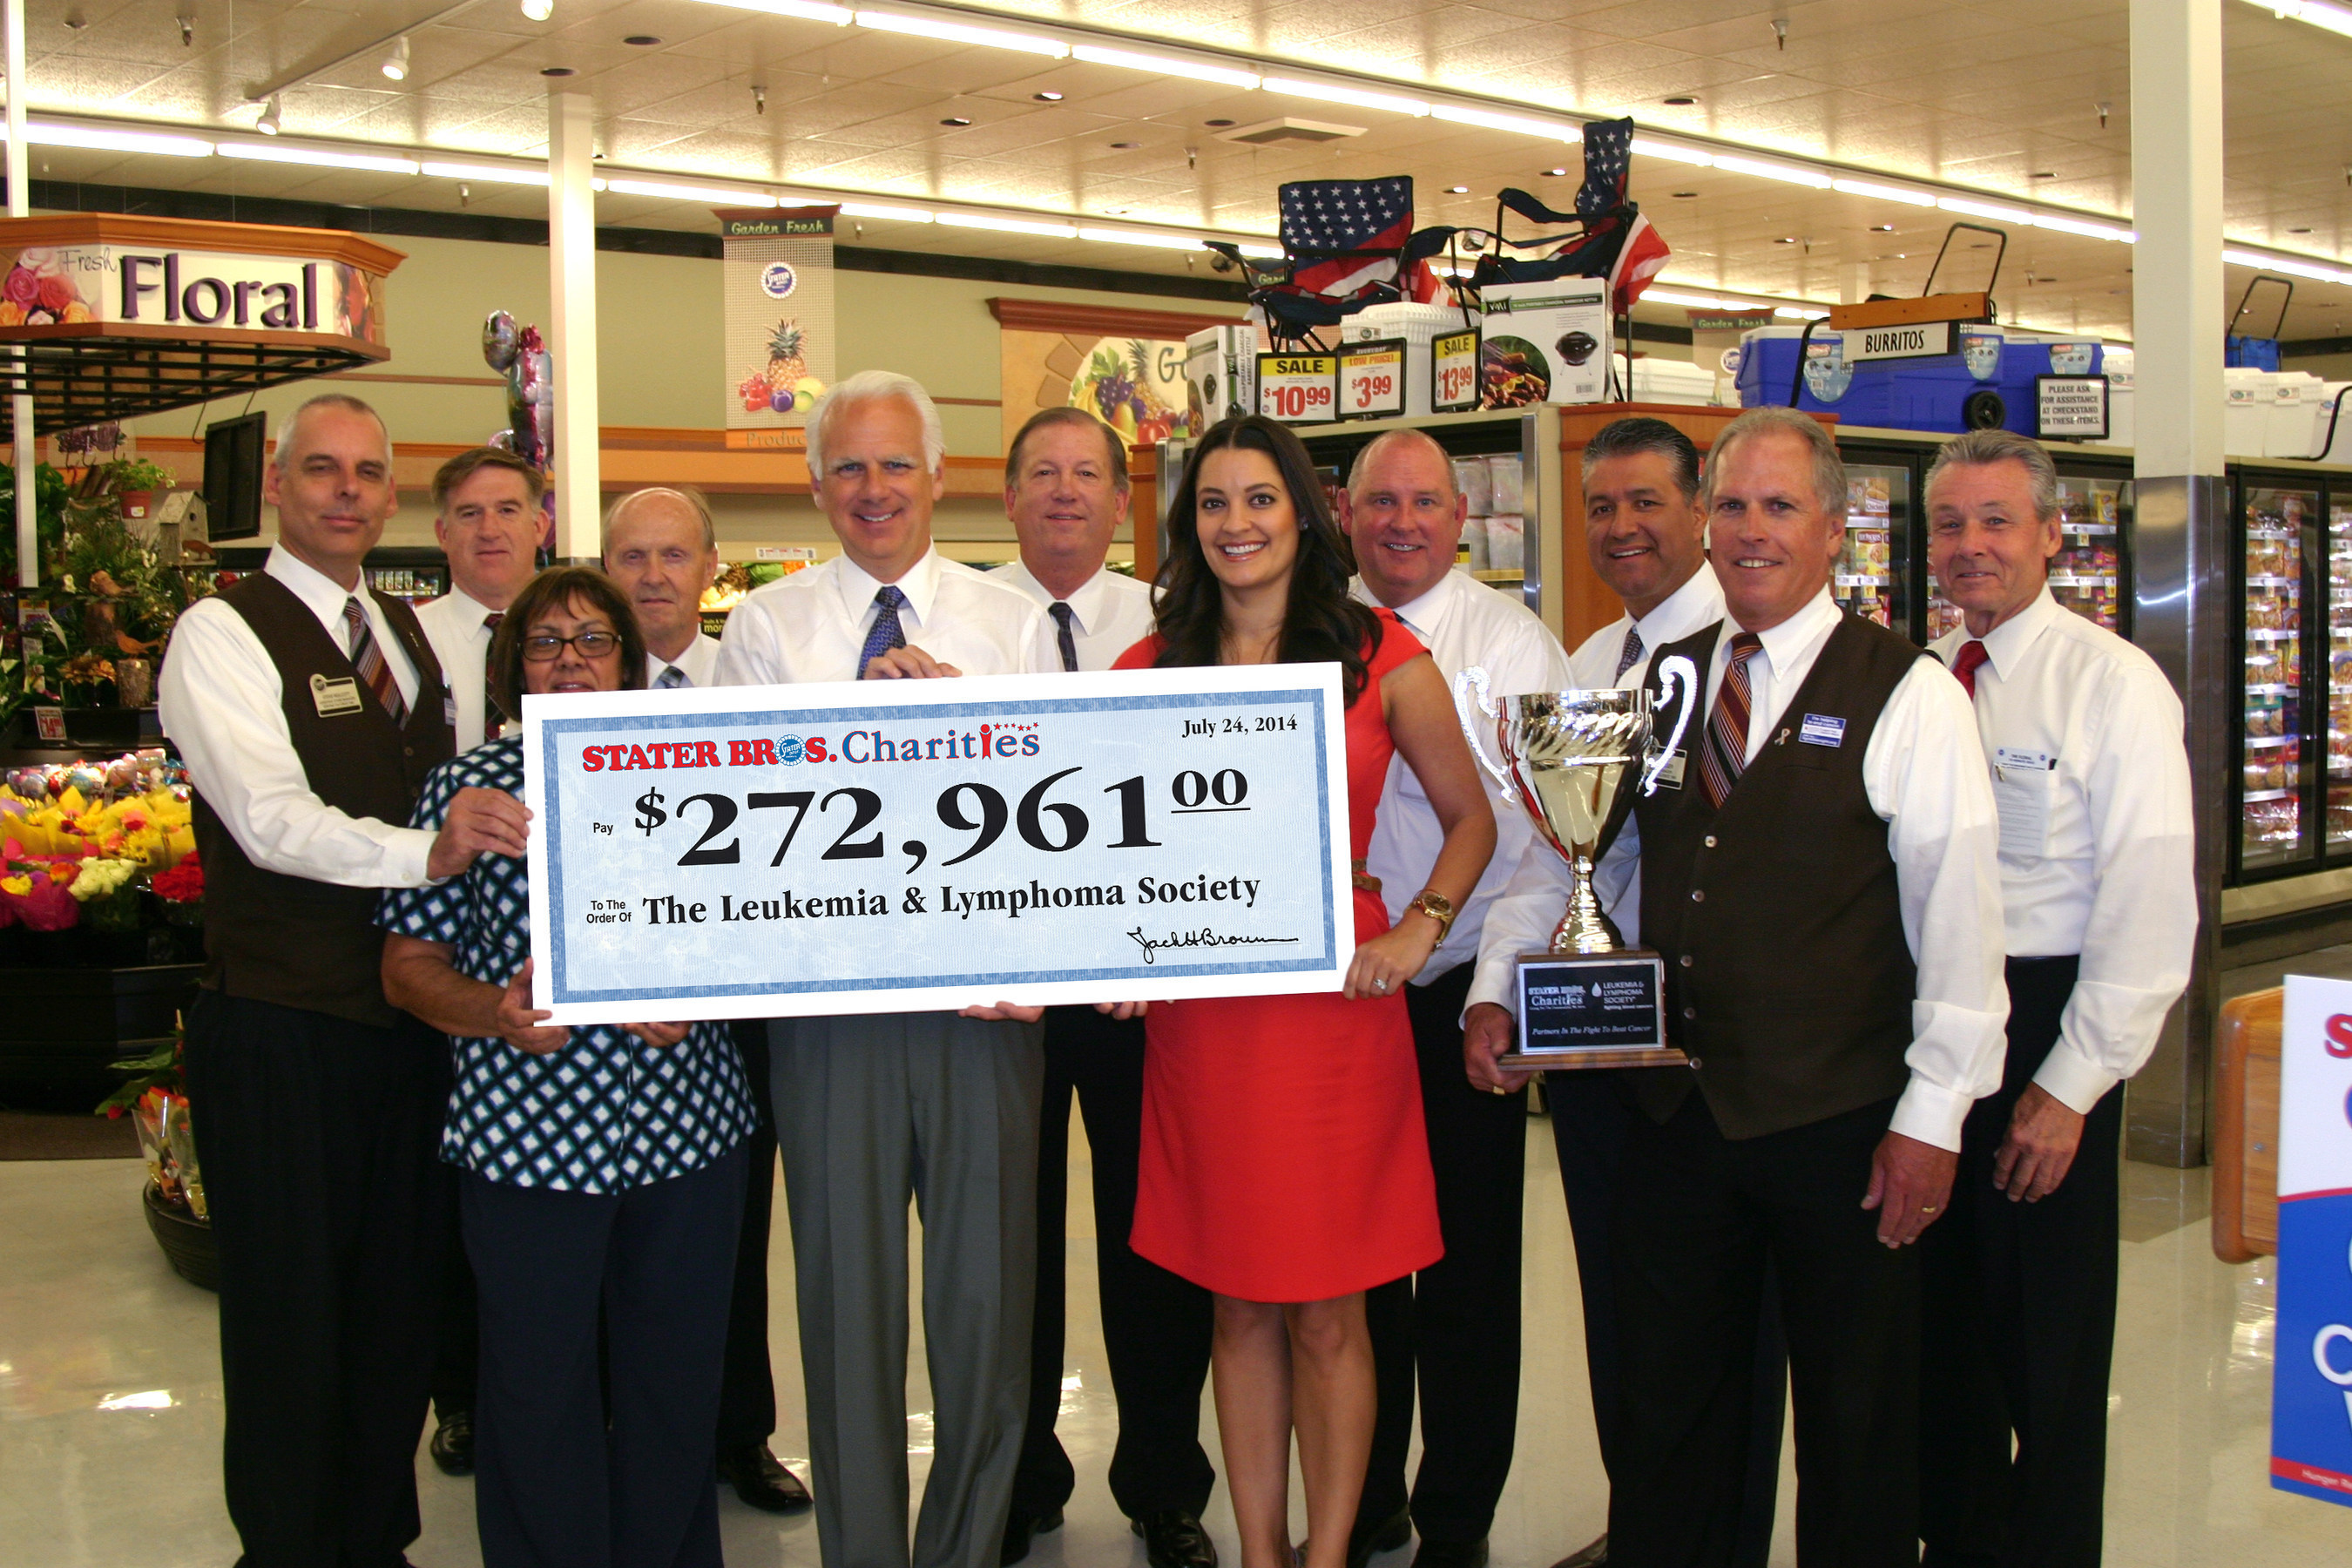 Stater Bros. President and COO, Pete Van Helden (center) along with Stater Bros. representatives present a $272,961 check to the Leukemia & Lymphoma Society.  The check presentation took place inside the Stater Bros. supermarket located at 42171 Big Bear Blvd. in Big Bear Lake, CA. (PRNewsFoto/Stater Bros. Charities)